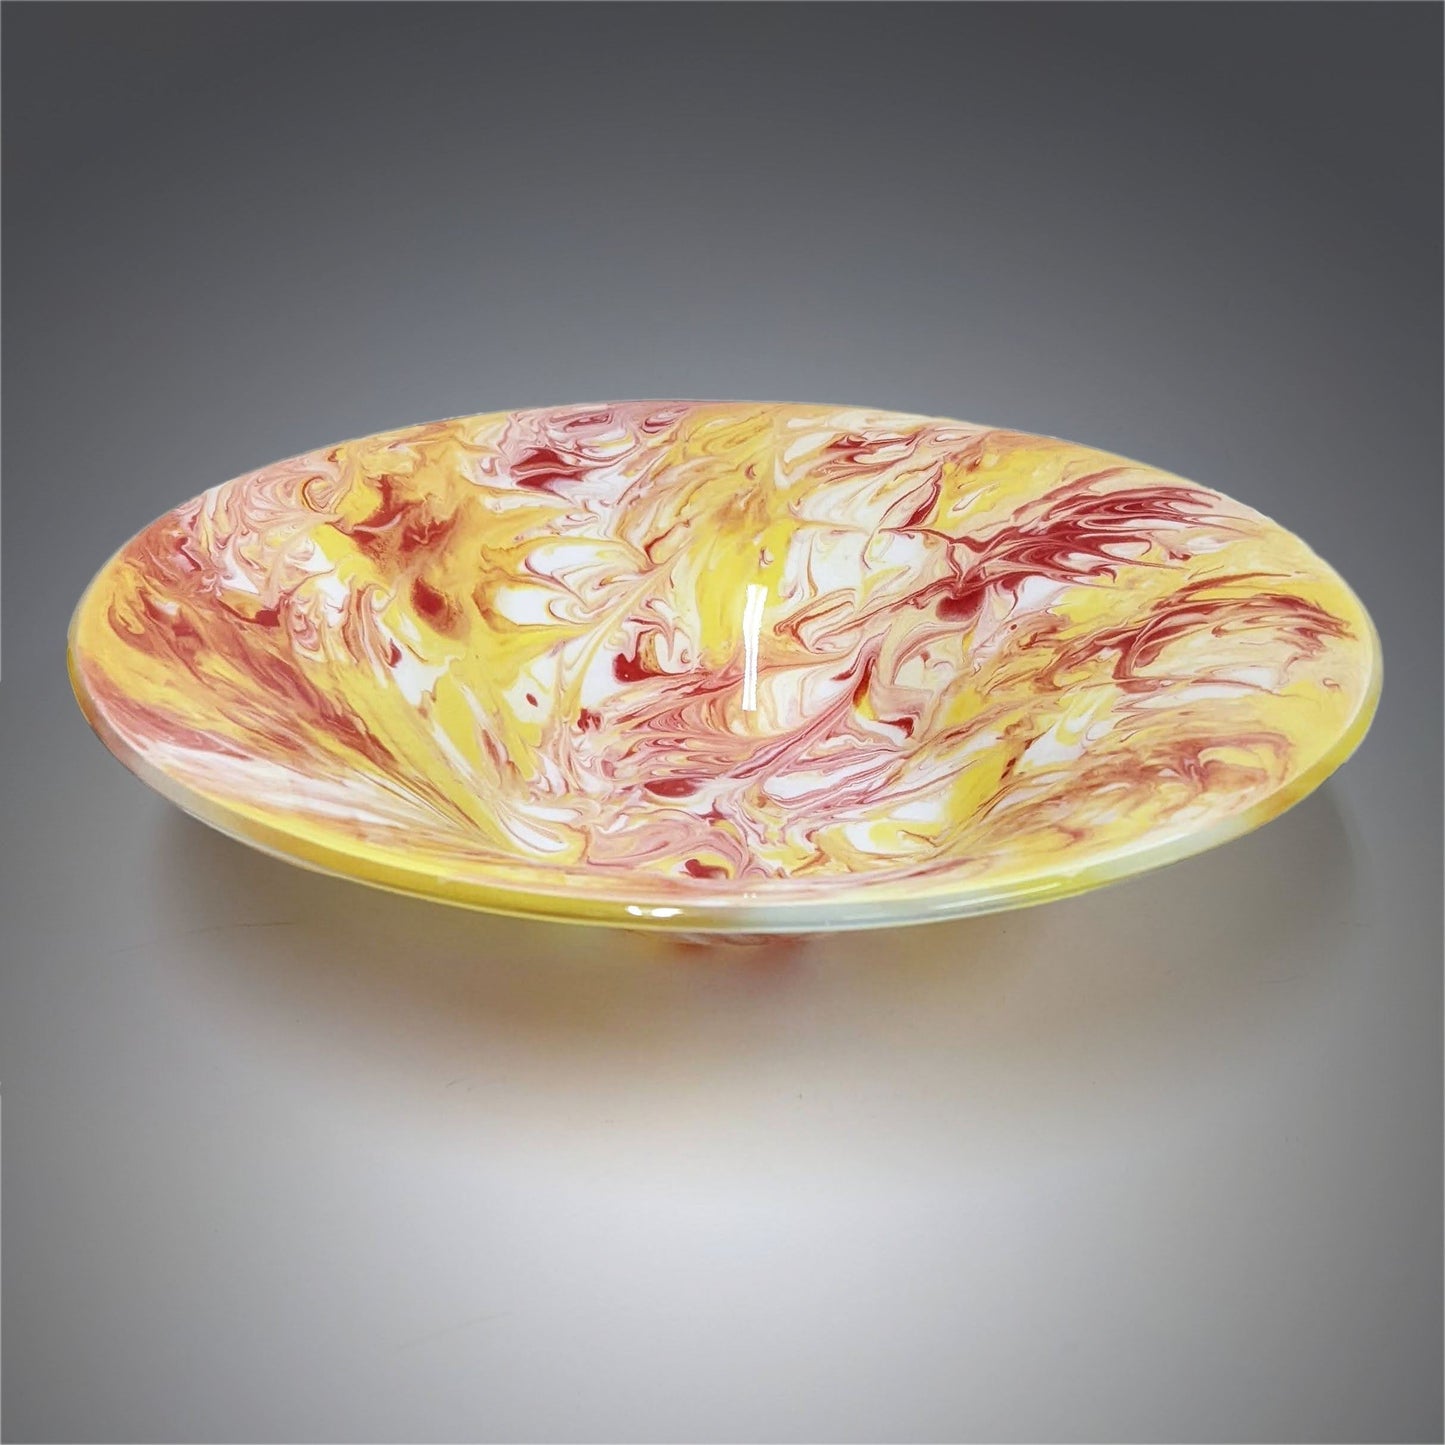 Contemporary Glass Art Serving Bowl in Red Yellow White